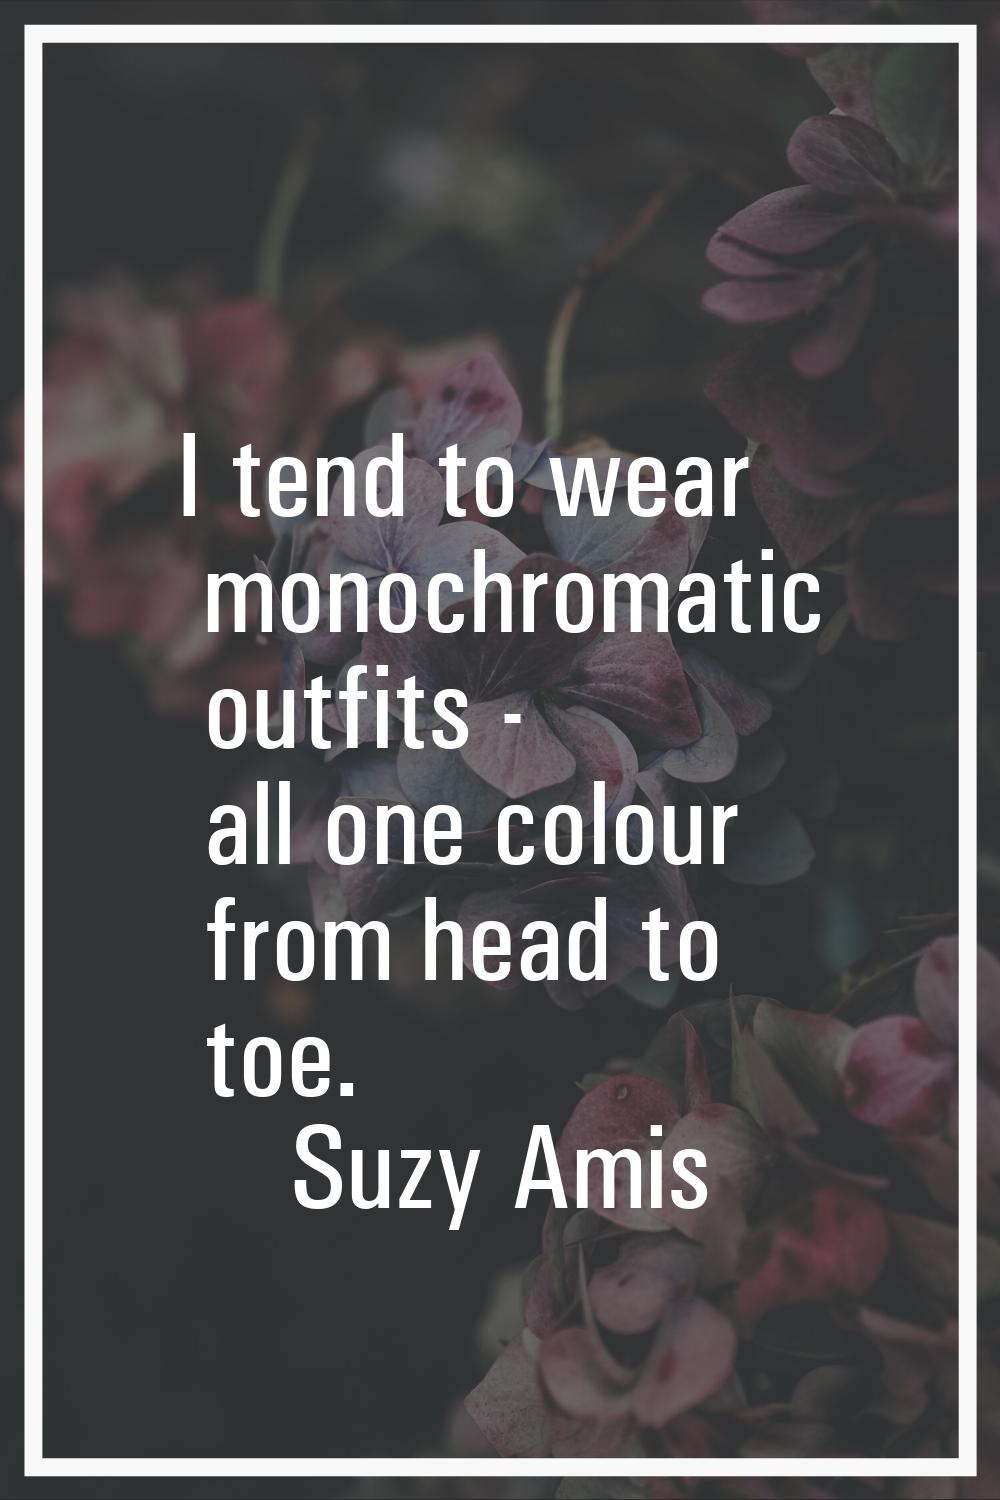 I tend to wear monochromatic outfits - all one colour from head to toe.